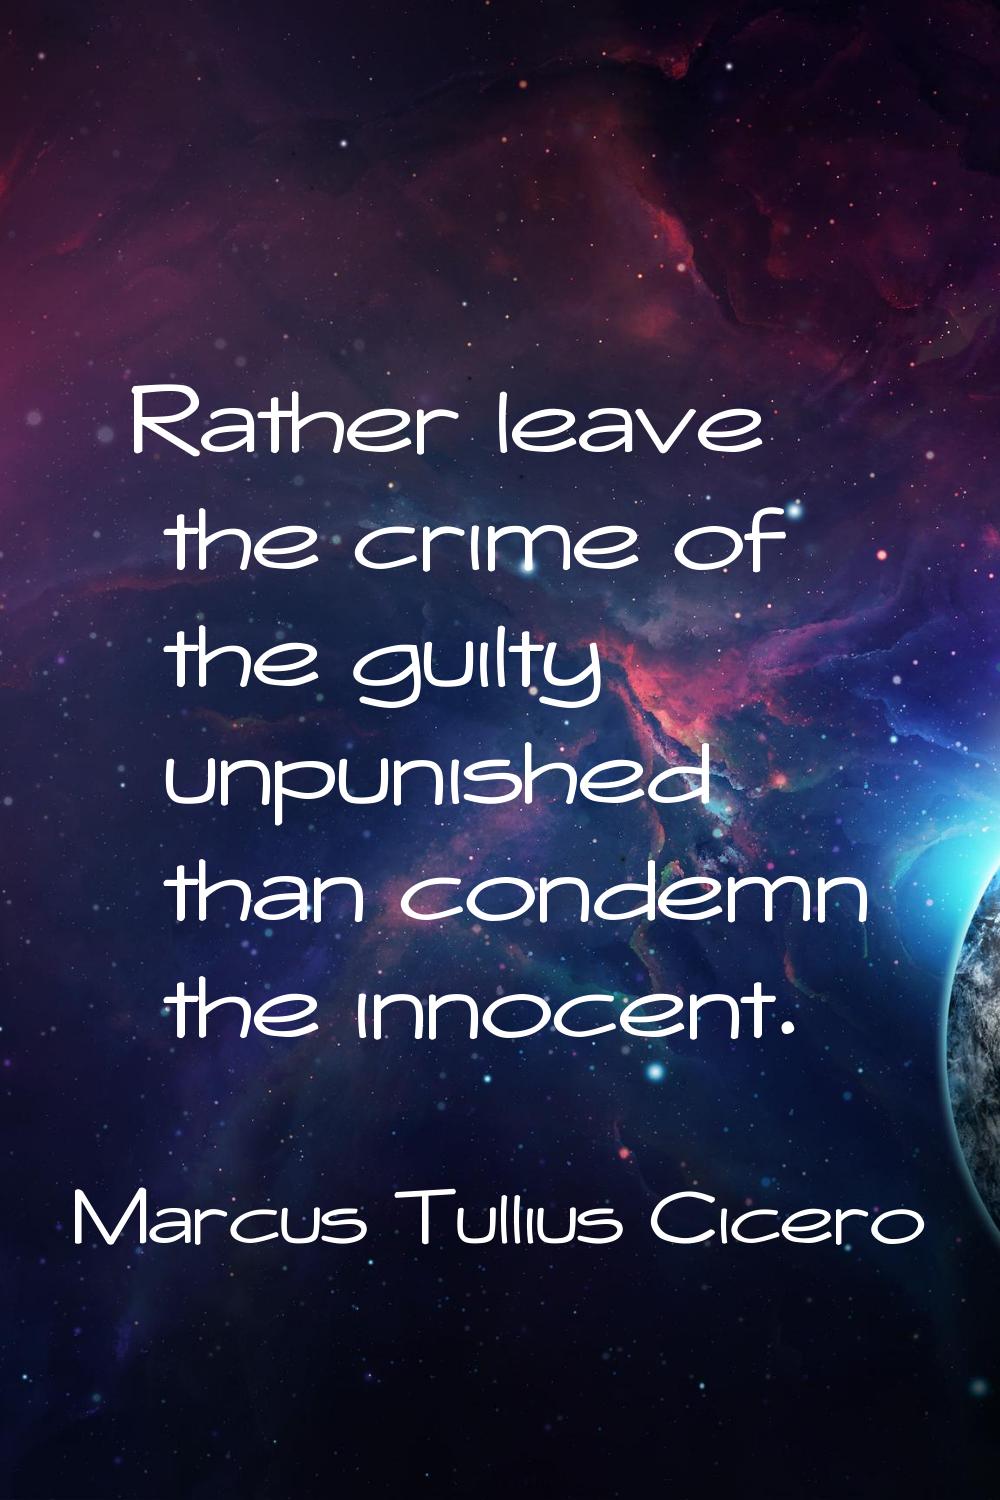 Rather leave the crime of the guilty unpunished than condemn the innocent.